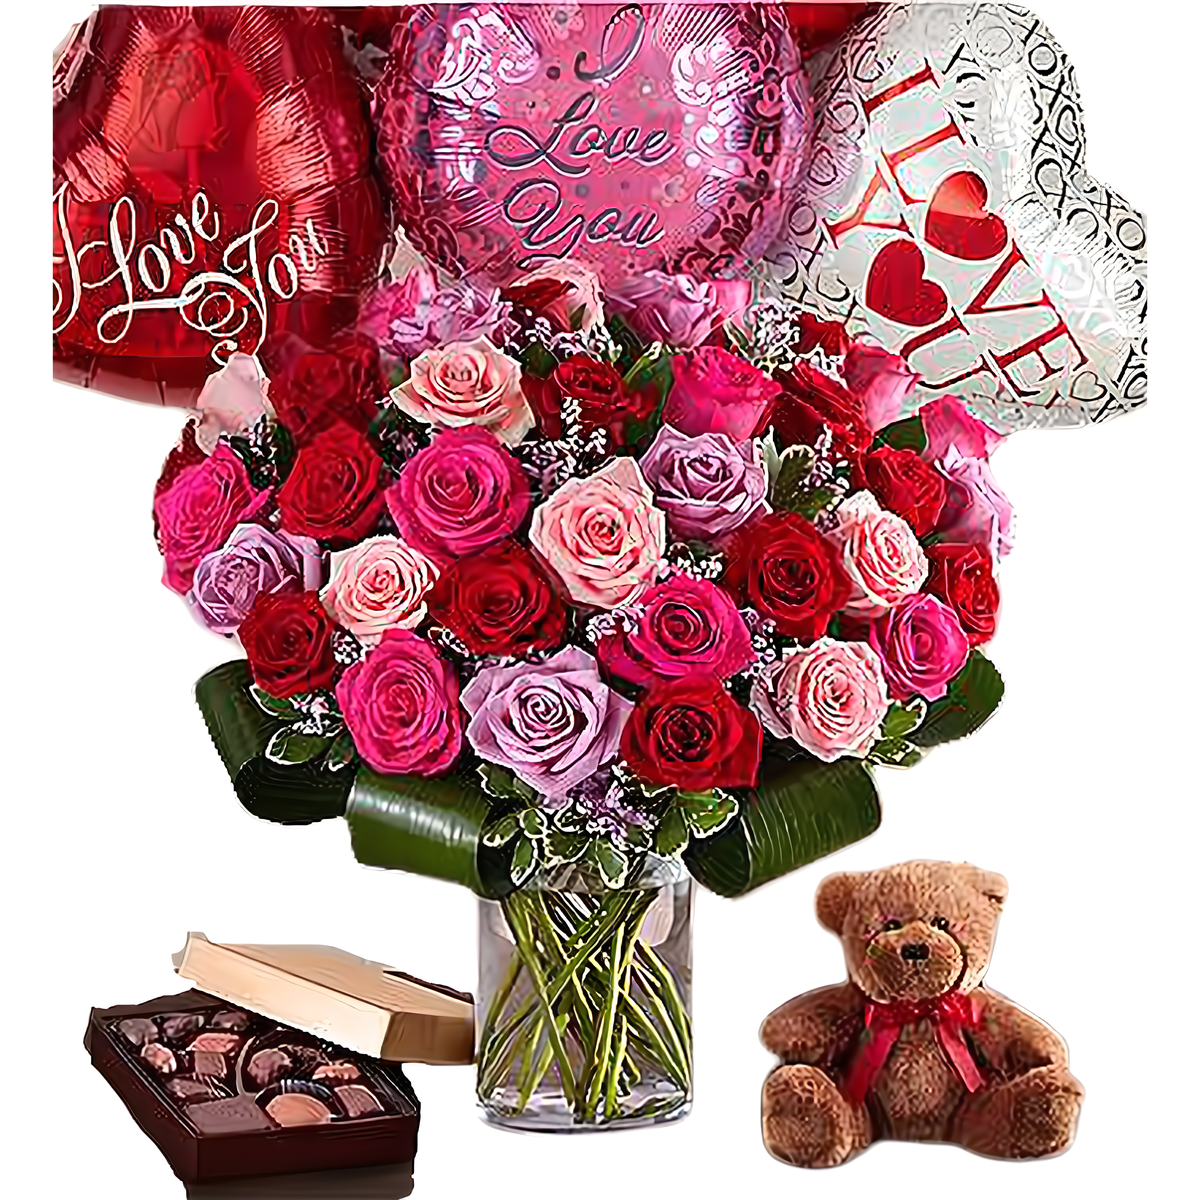 Manhattan Flower Delivery - Premium Assorted Rose Bouquet w/ 6 Balloons, Teddy, &amp; Chocolates - Occasions &gt; Anniversary